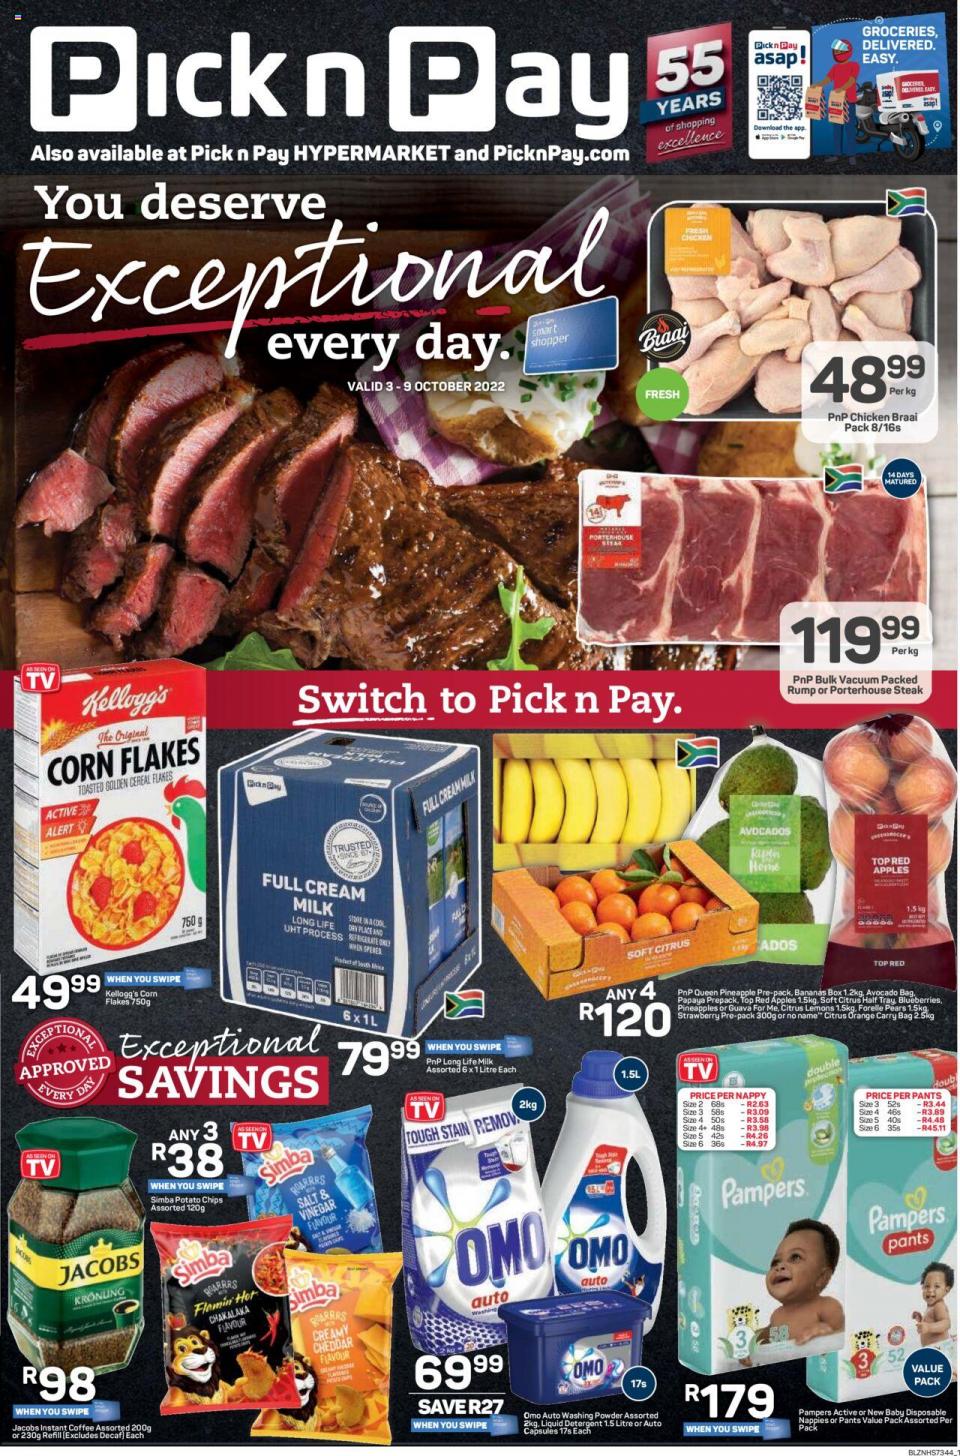 Pick n Pay Specials Exceptional Catalogue 3 – 9 October 2022